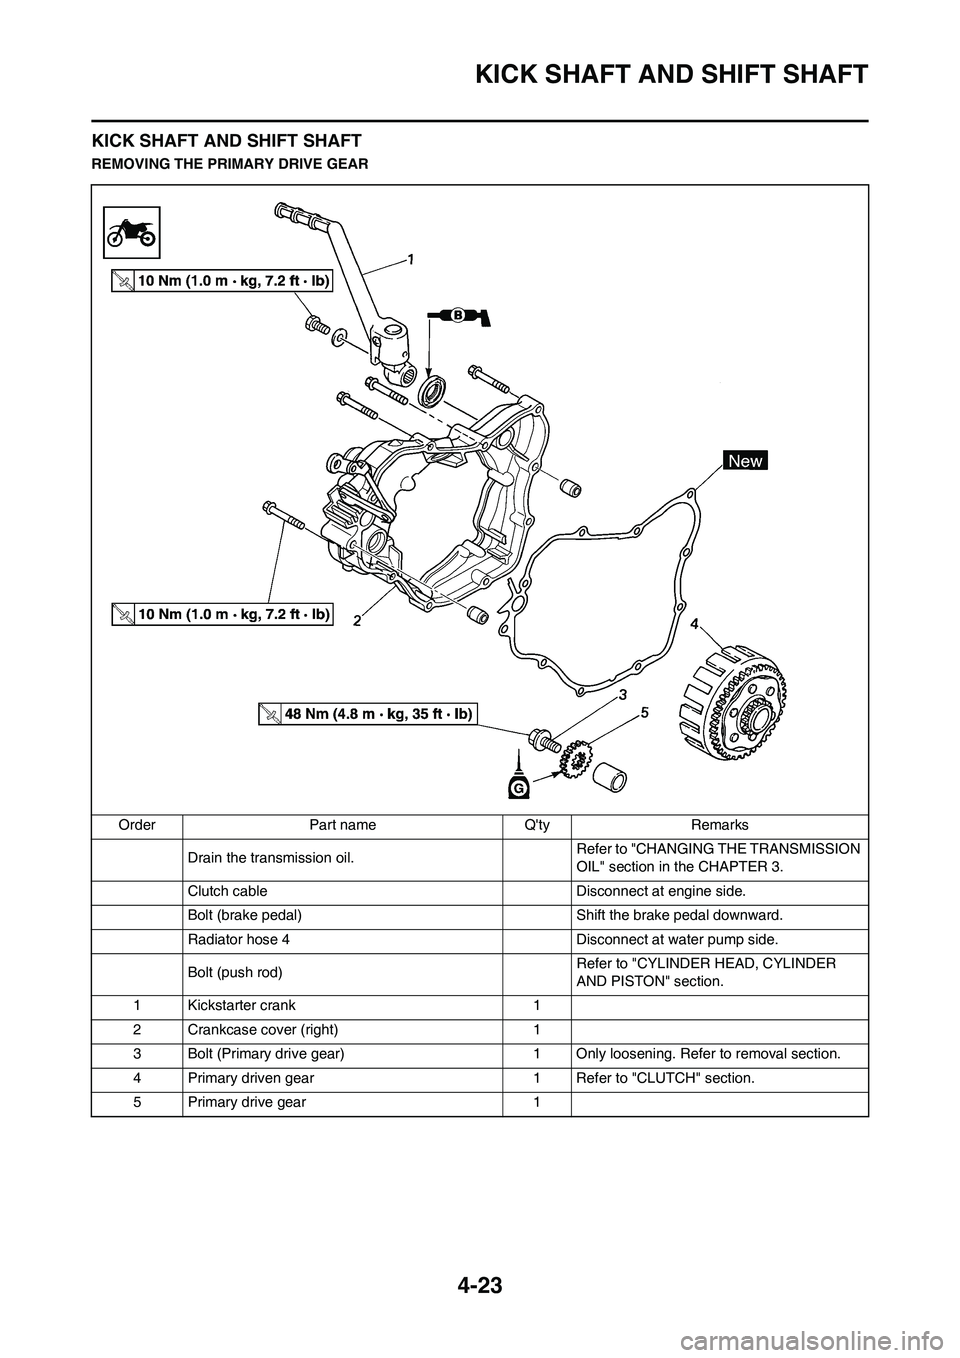 YAMAHA YZ125LC 2010 Owners Guide 4-23
KICK SHAFT AND SHIFT SHAFT
KICK SHAFT AND SHIFT SHAFT
REMOVING THE PRIMARY DRIVE GEAR
Order Part name Qty Remarks
Drain the transmission oil. Refer to "CHANGING THE TRANSMISSION 
OIL" section in